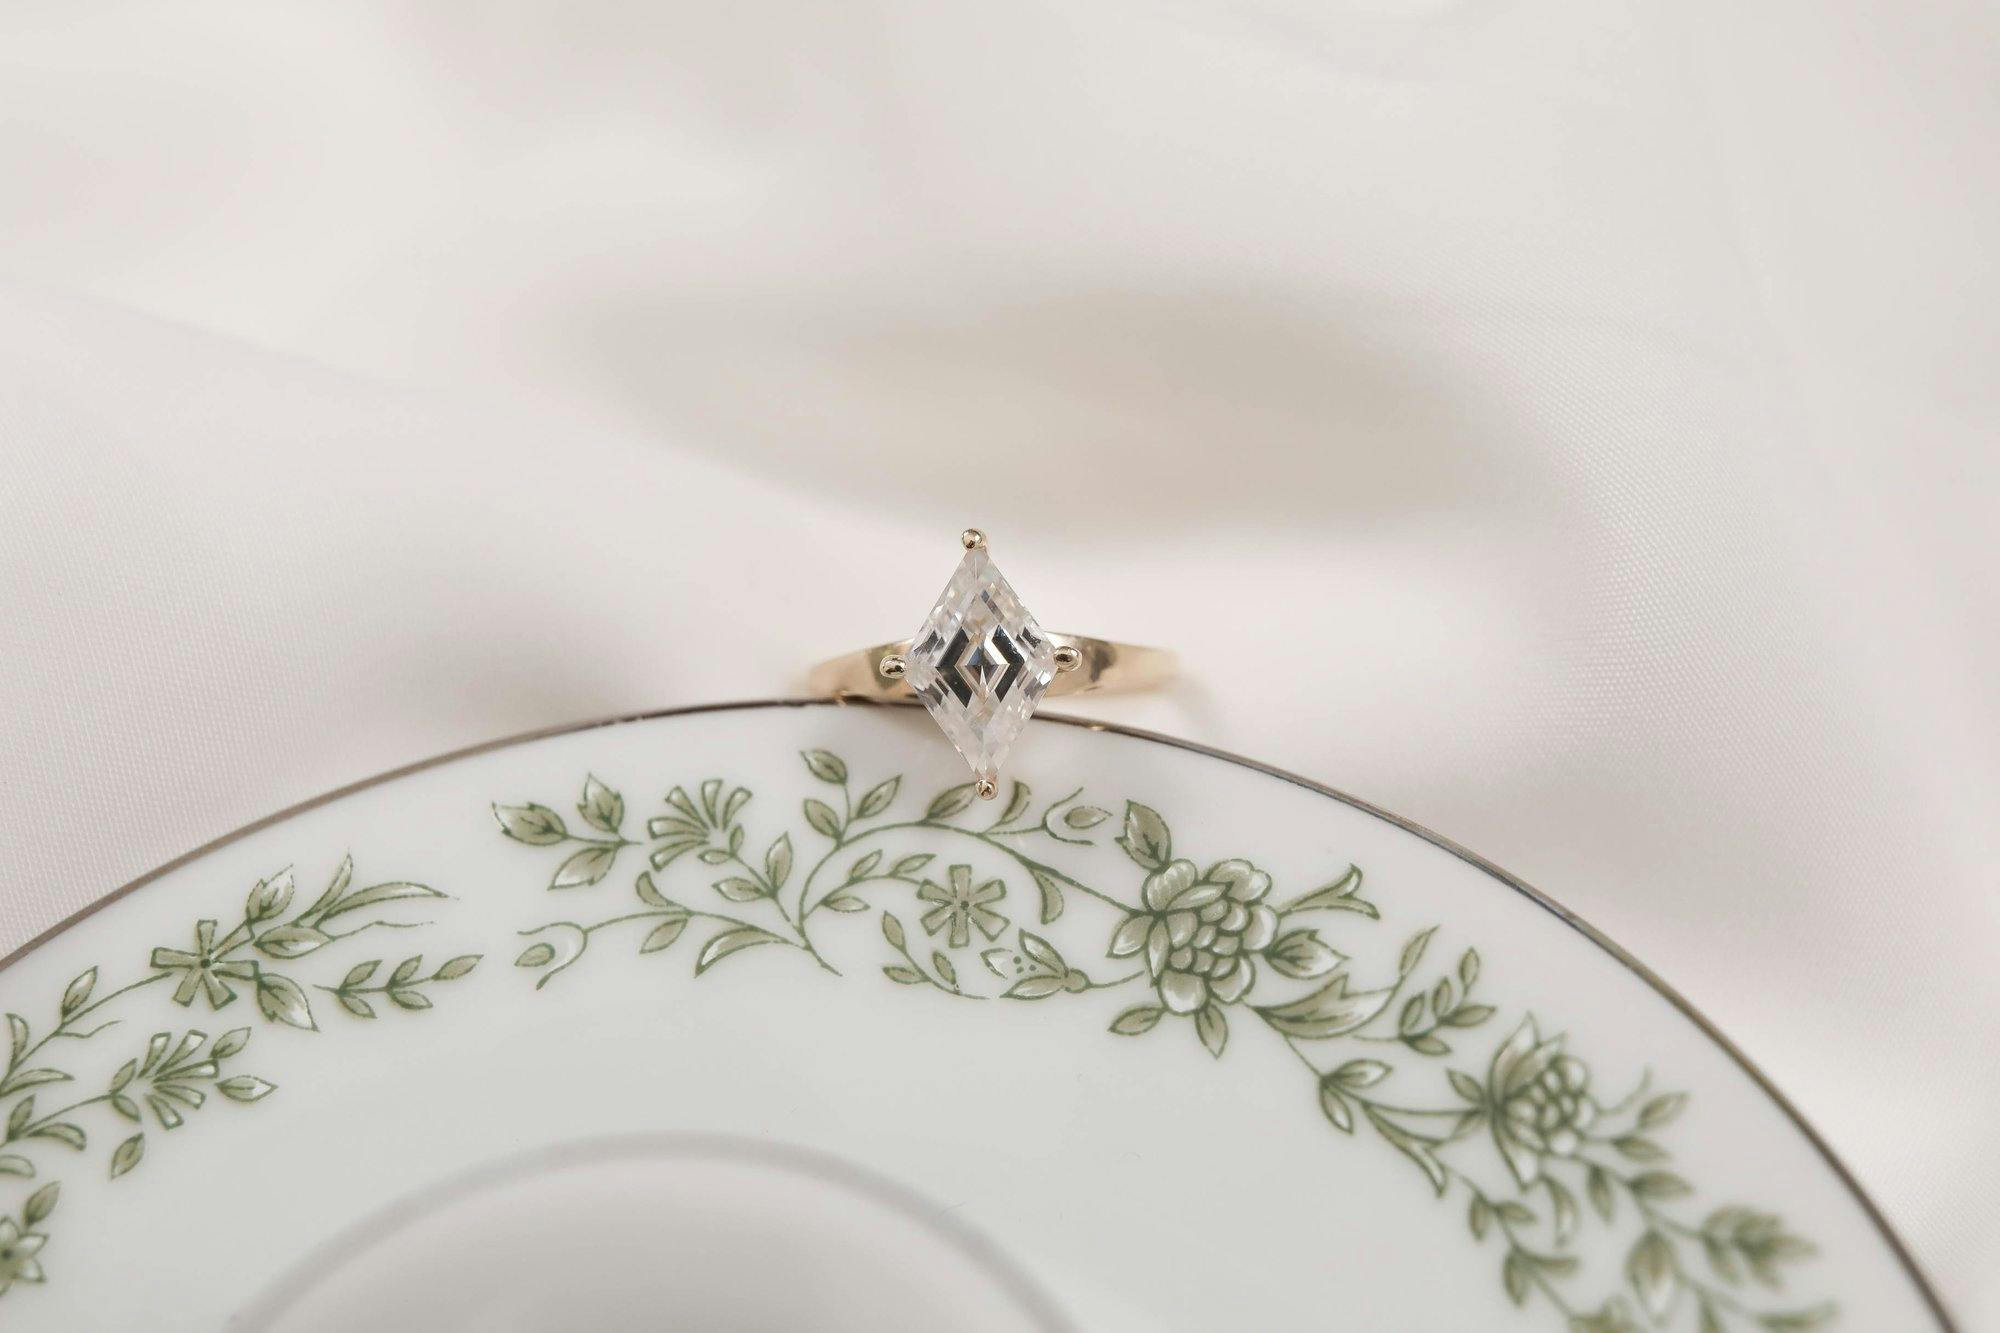 a photo of a lozenge cut engagement ring resting on a plate